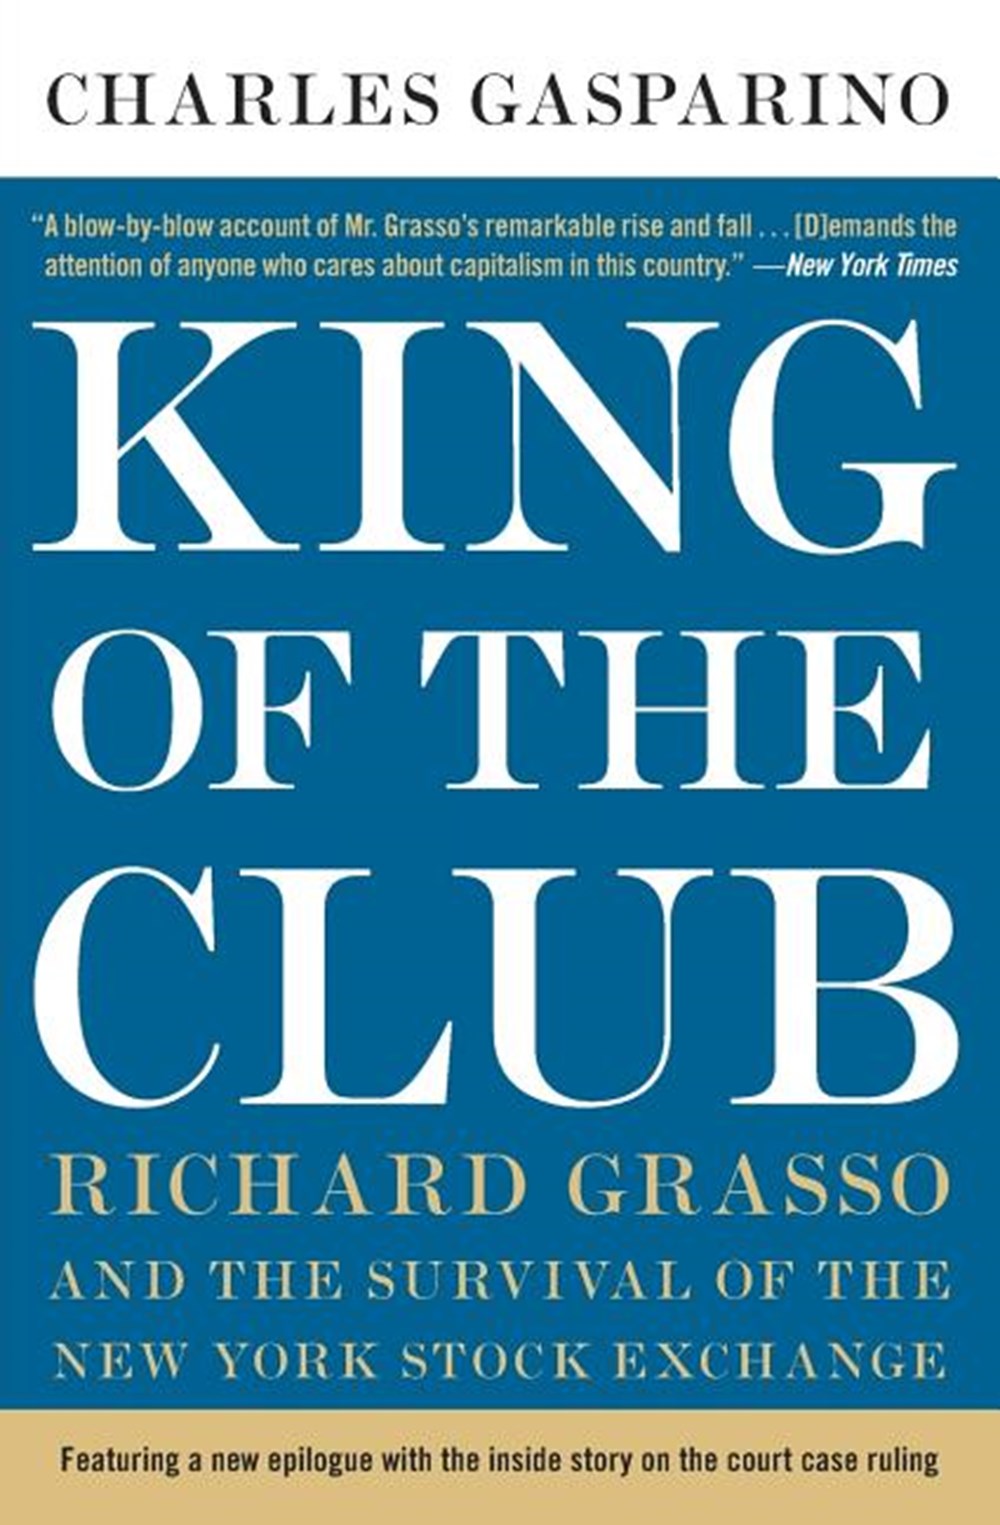 King of the Club: Richard Grasso and the Survival of the New York Stock Exchange